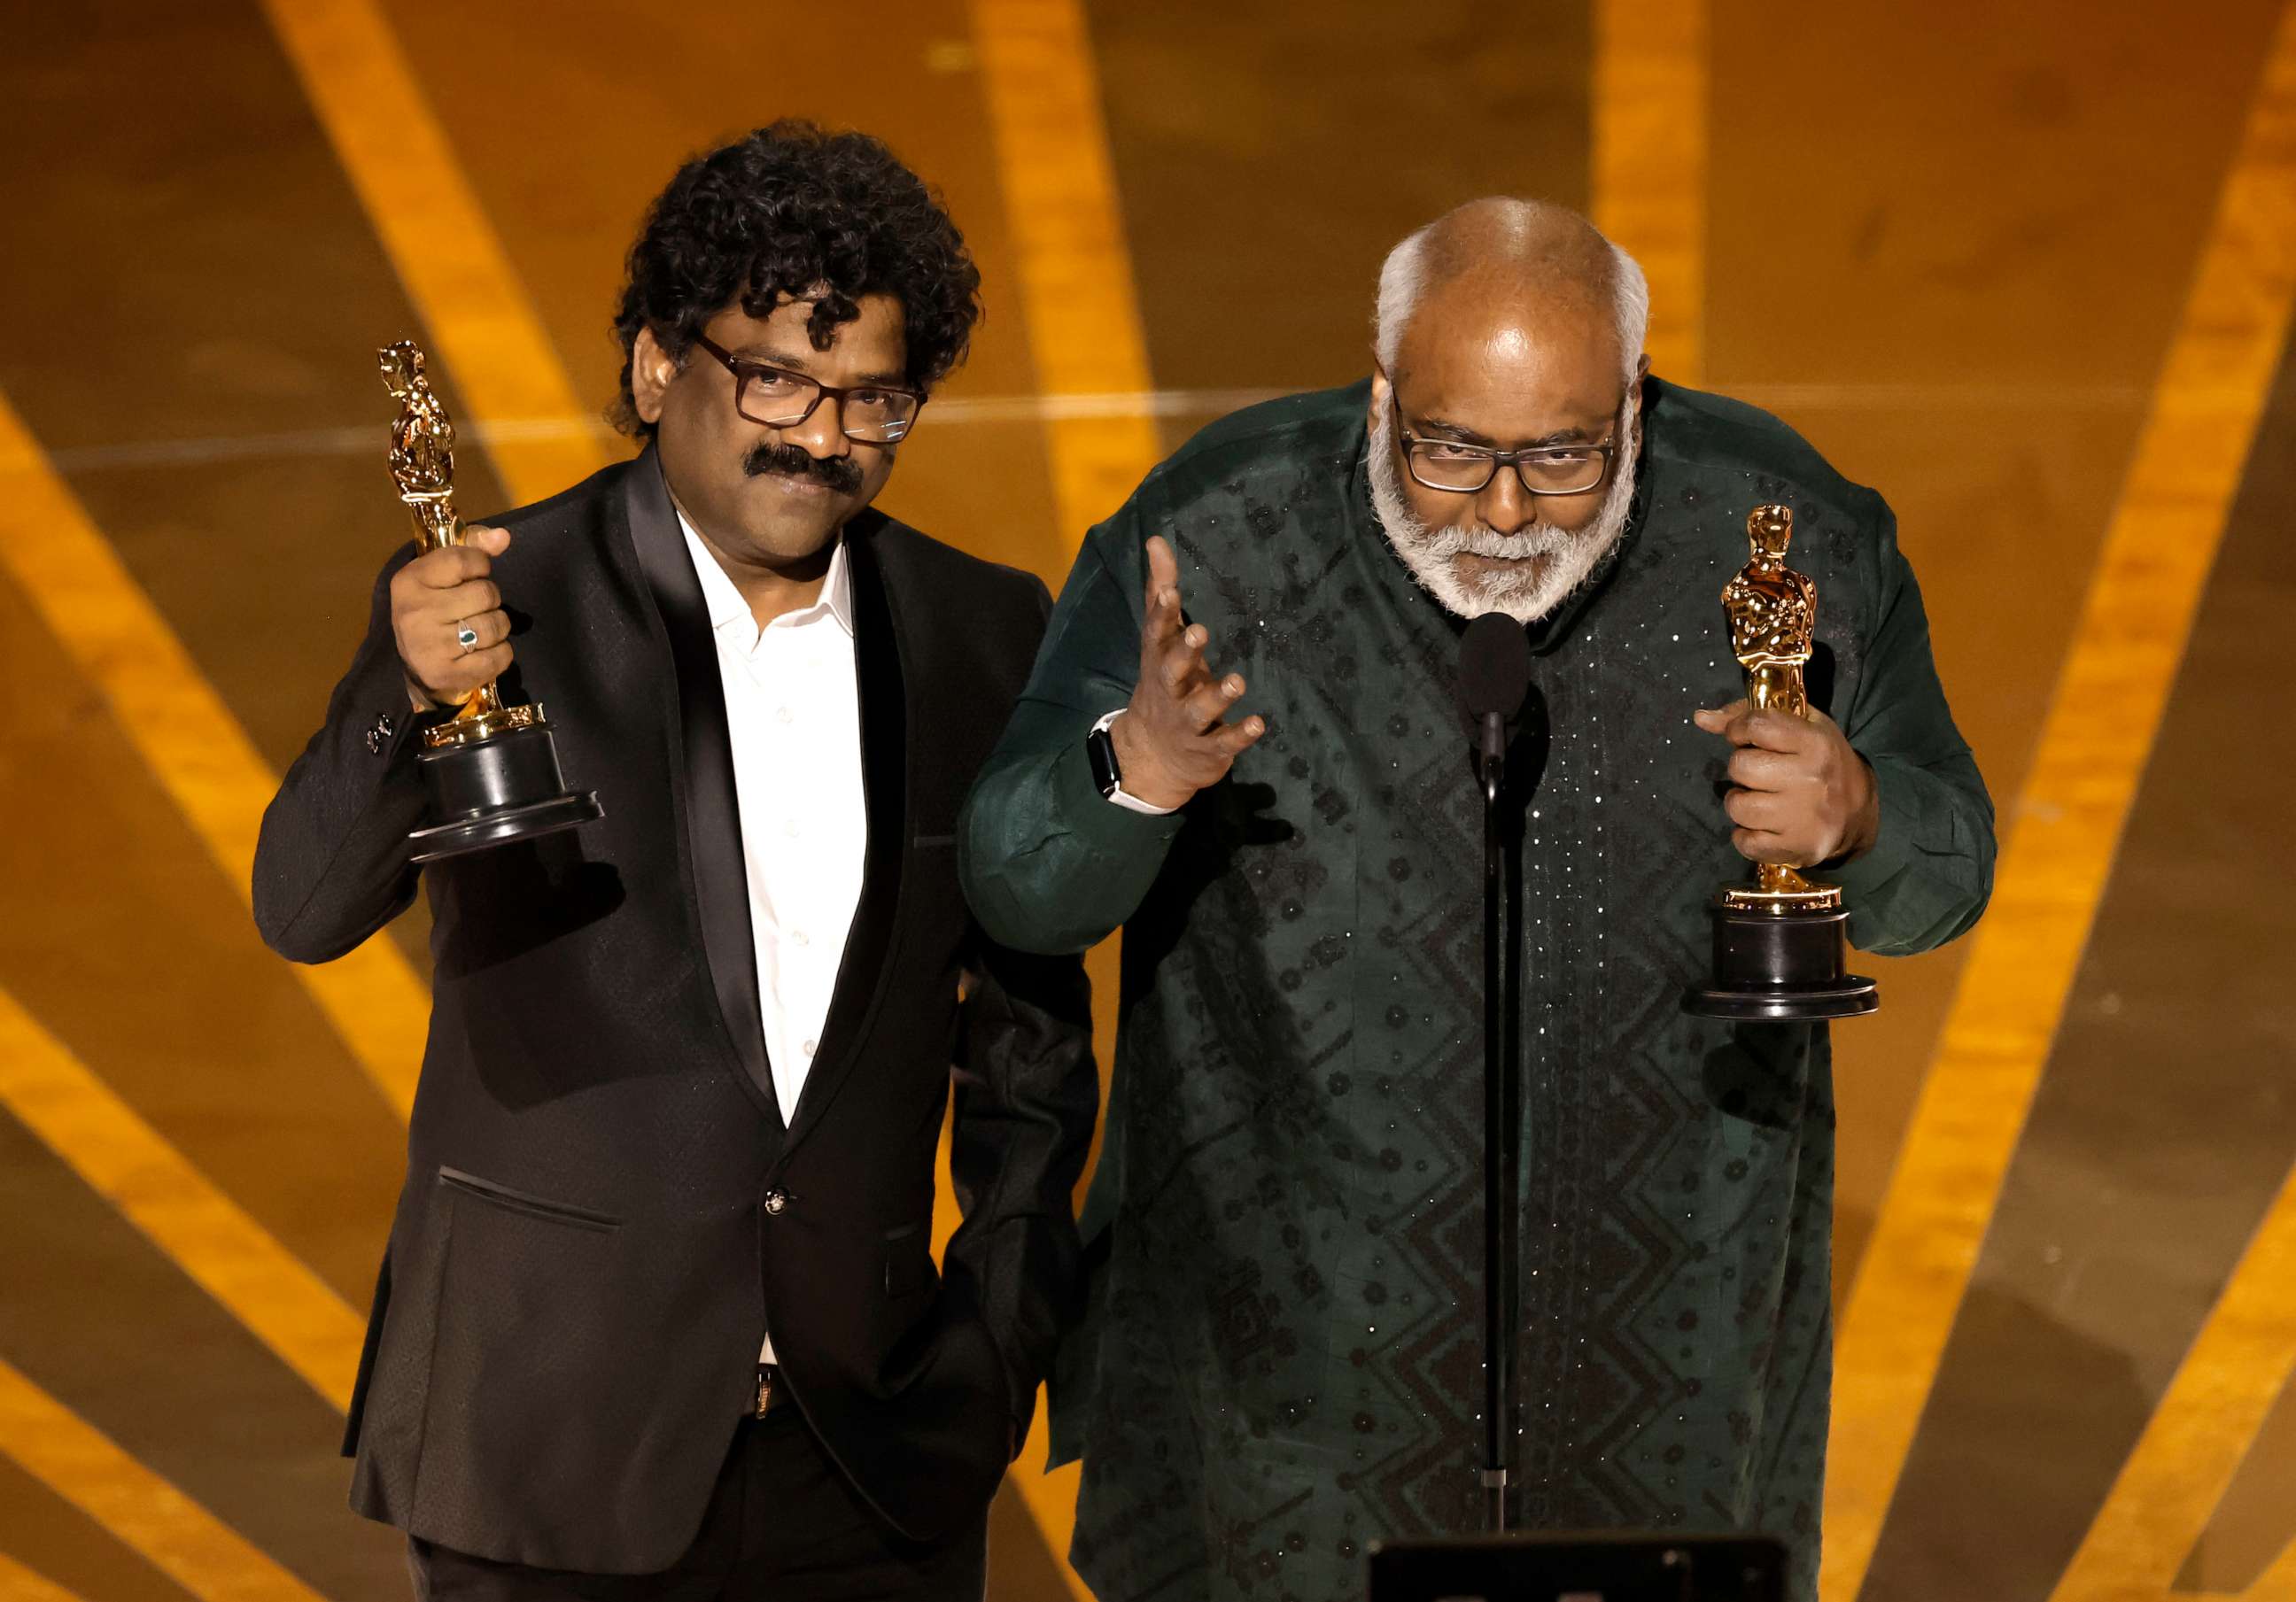 PHOTO: Chandrabose and M. M. Keeravani accept the Best Original Song award for 'Naatu Naatu' from "RRR" onstage during the 95th Annual Academy Awards at Dolby Theatre on March 12, 2023 in Hollywood, California.